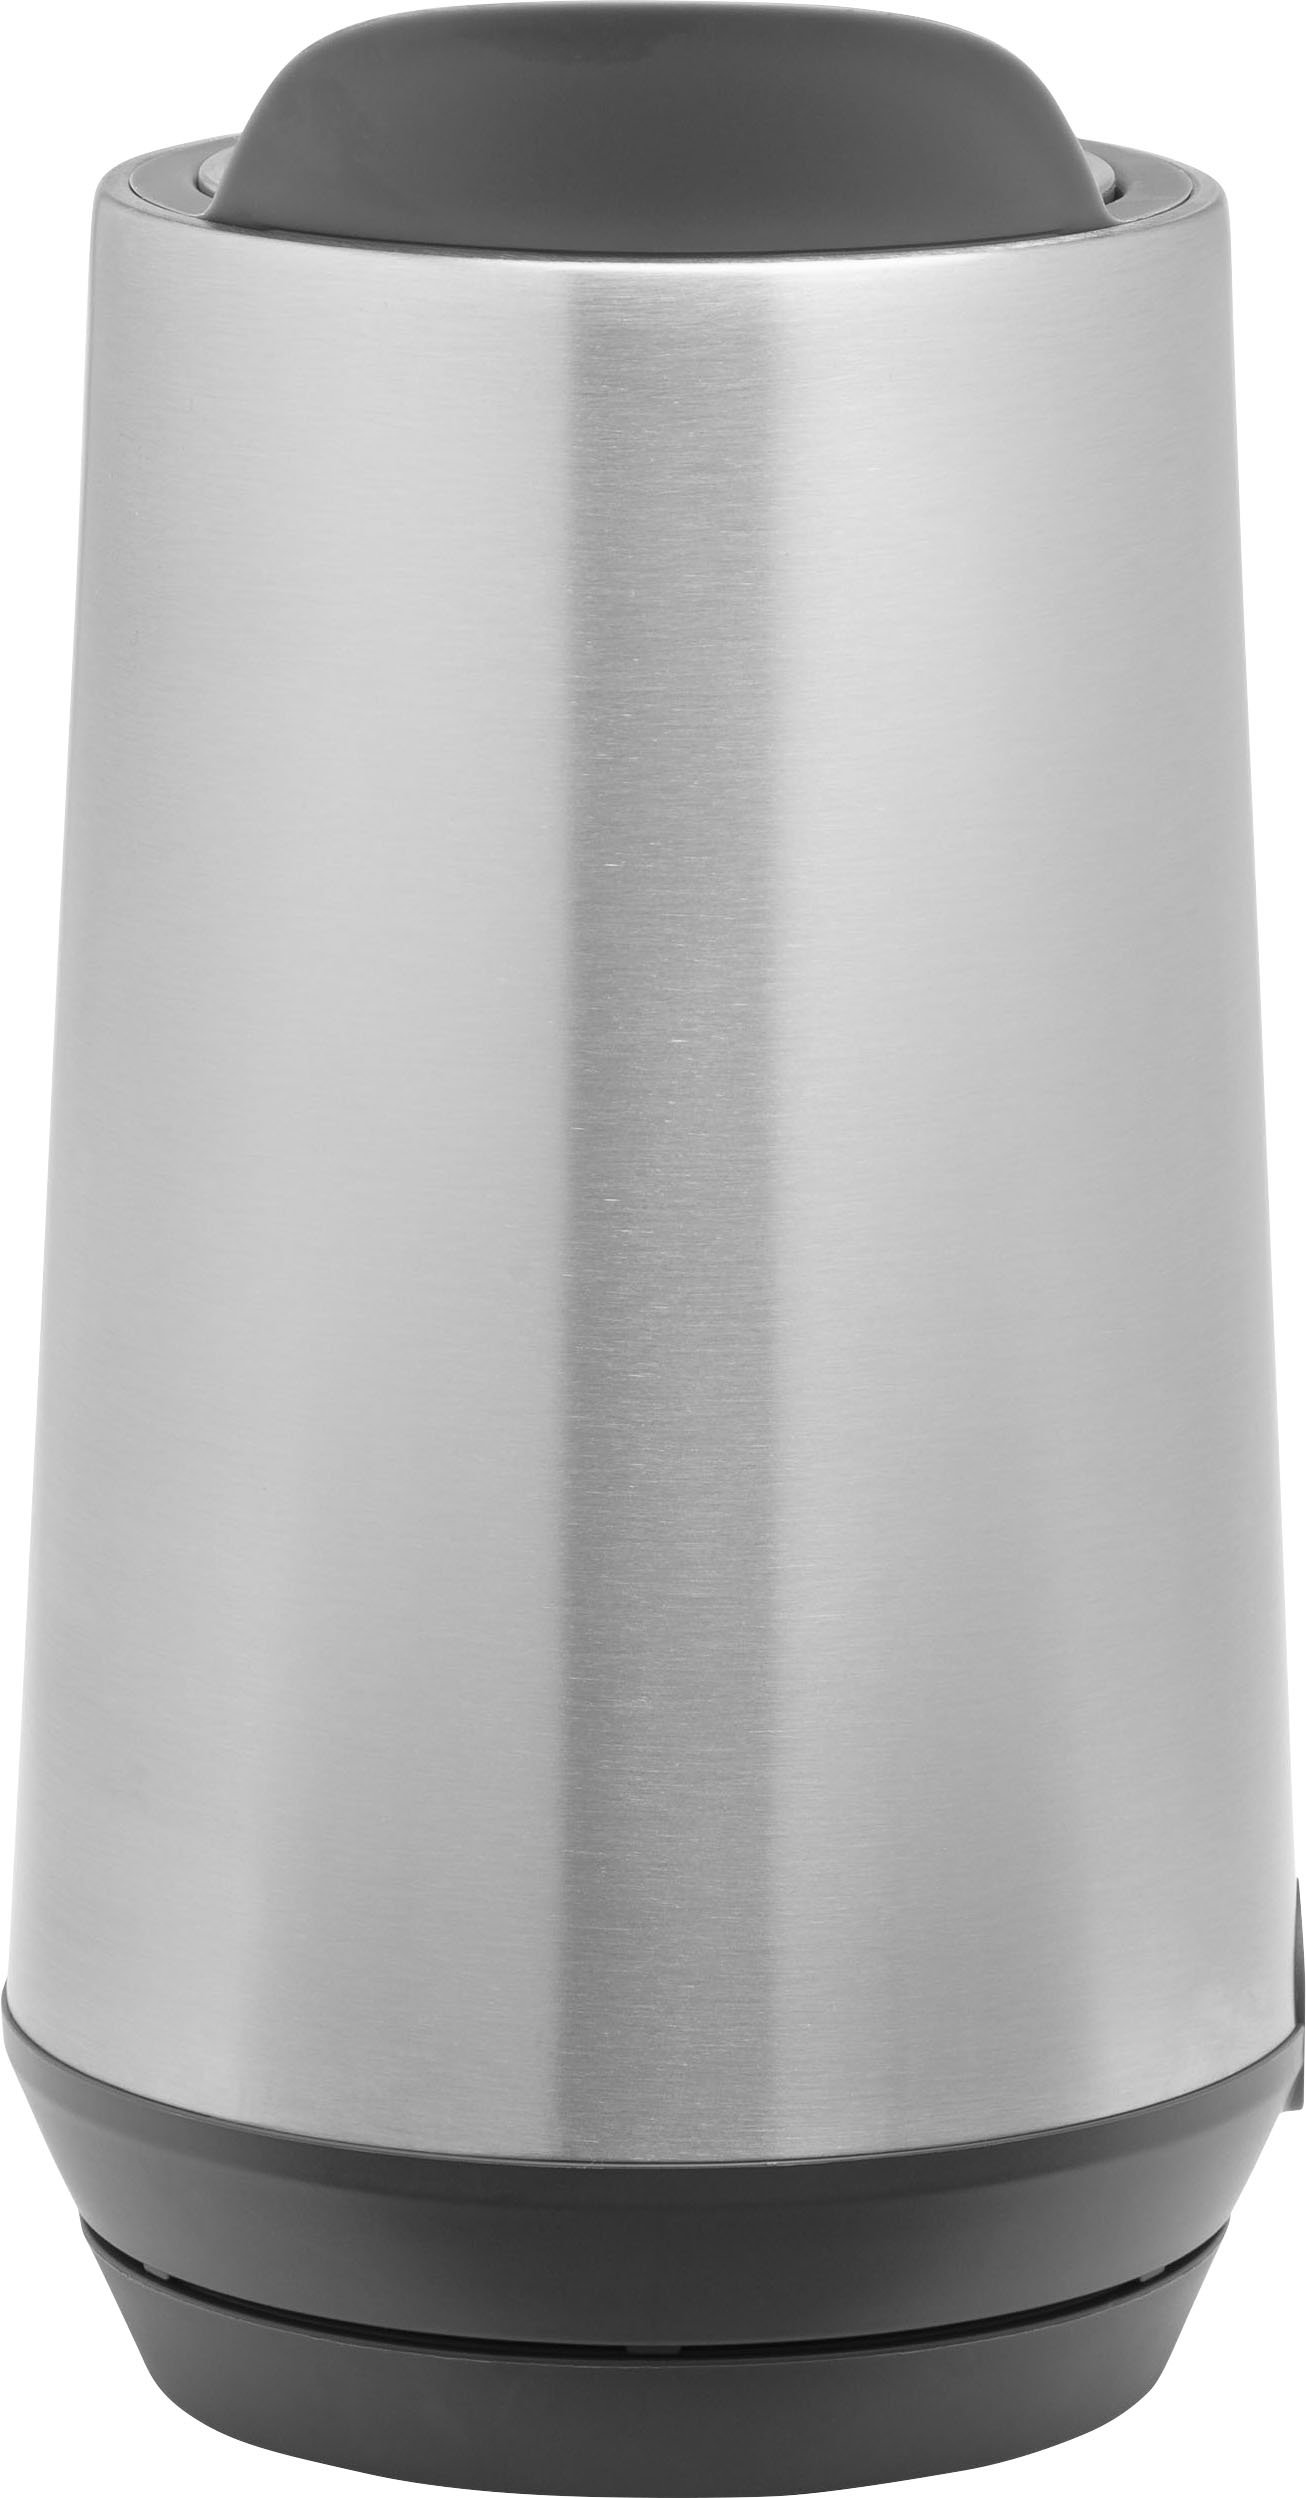 Angle View: GE - Electric Kettle with Digital Control - Brushed Stainless Steel